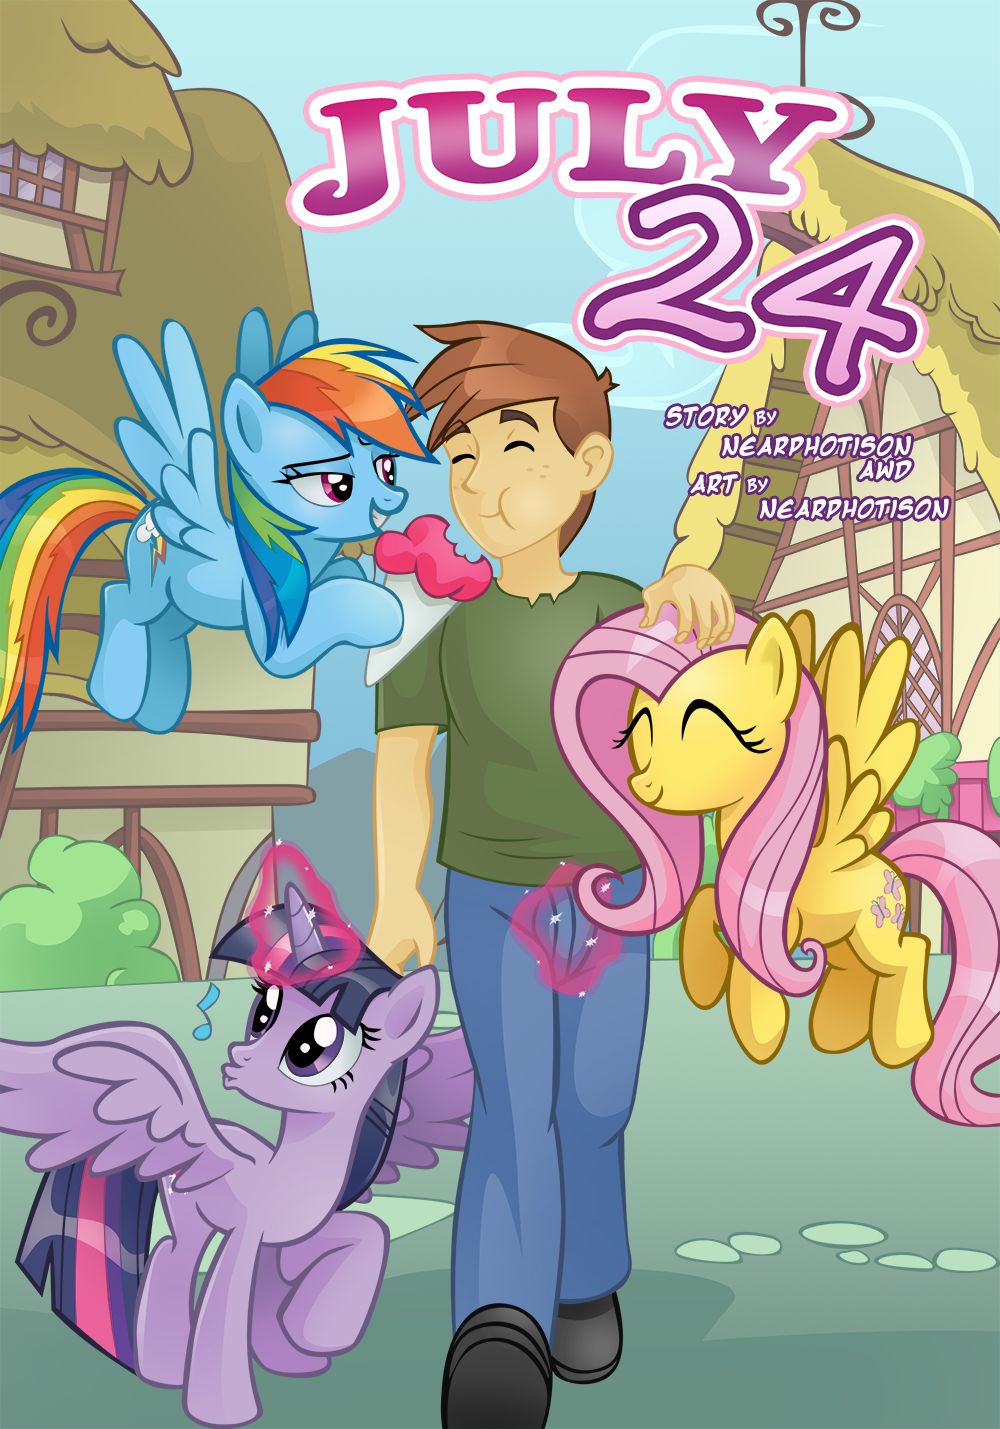 [Nearphotison] July 24 (My Little Pony: Friendship is Magic) (Ongoing) 1